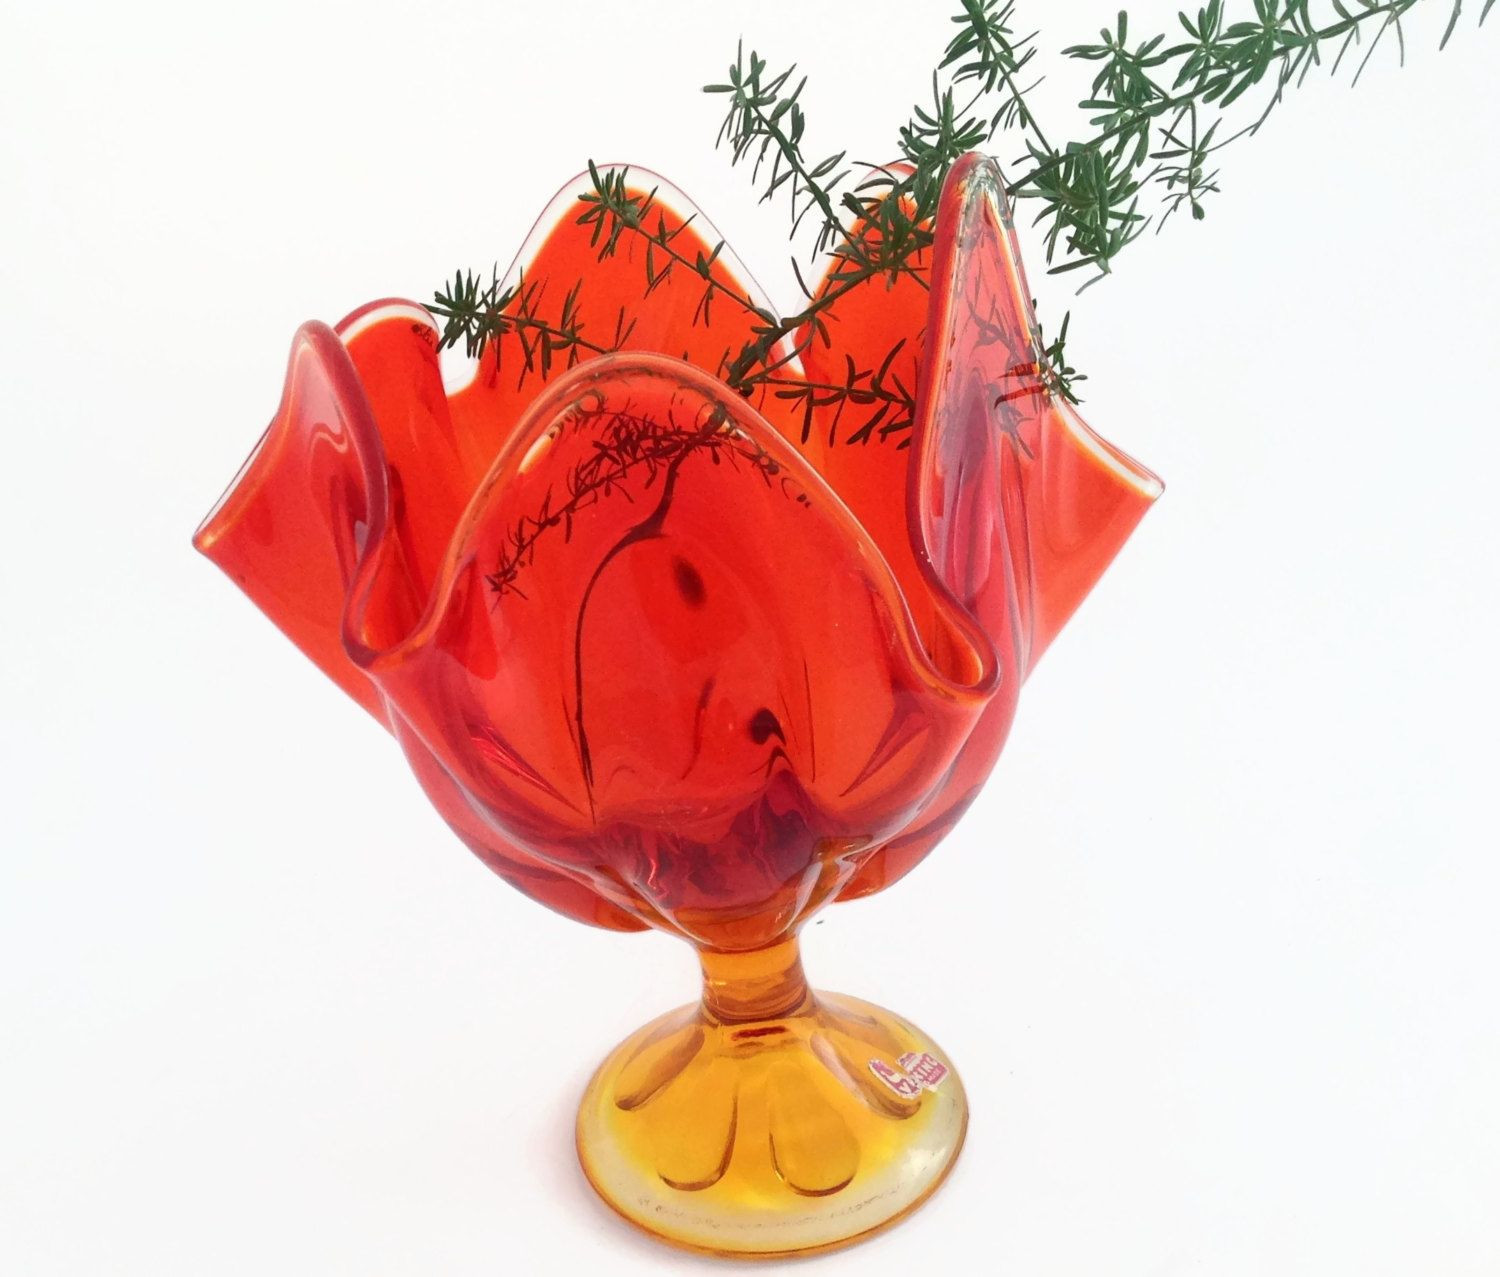 29 Recommended Red Glass Vases and Bowls 2022 free download red glass vases and bowls of vintage viking glass vase mid century modern orange glass bowl pertaining to vintage viking glass vase mid century modern orange glass bowl viking glass epic lin